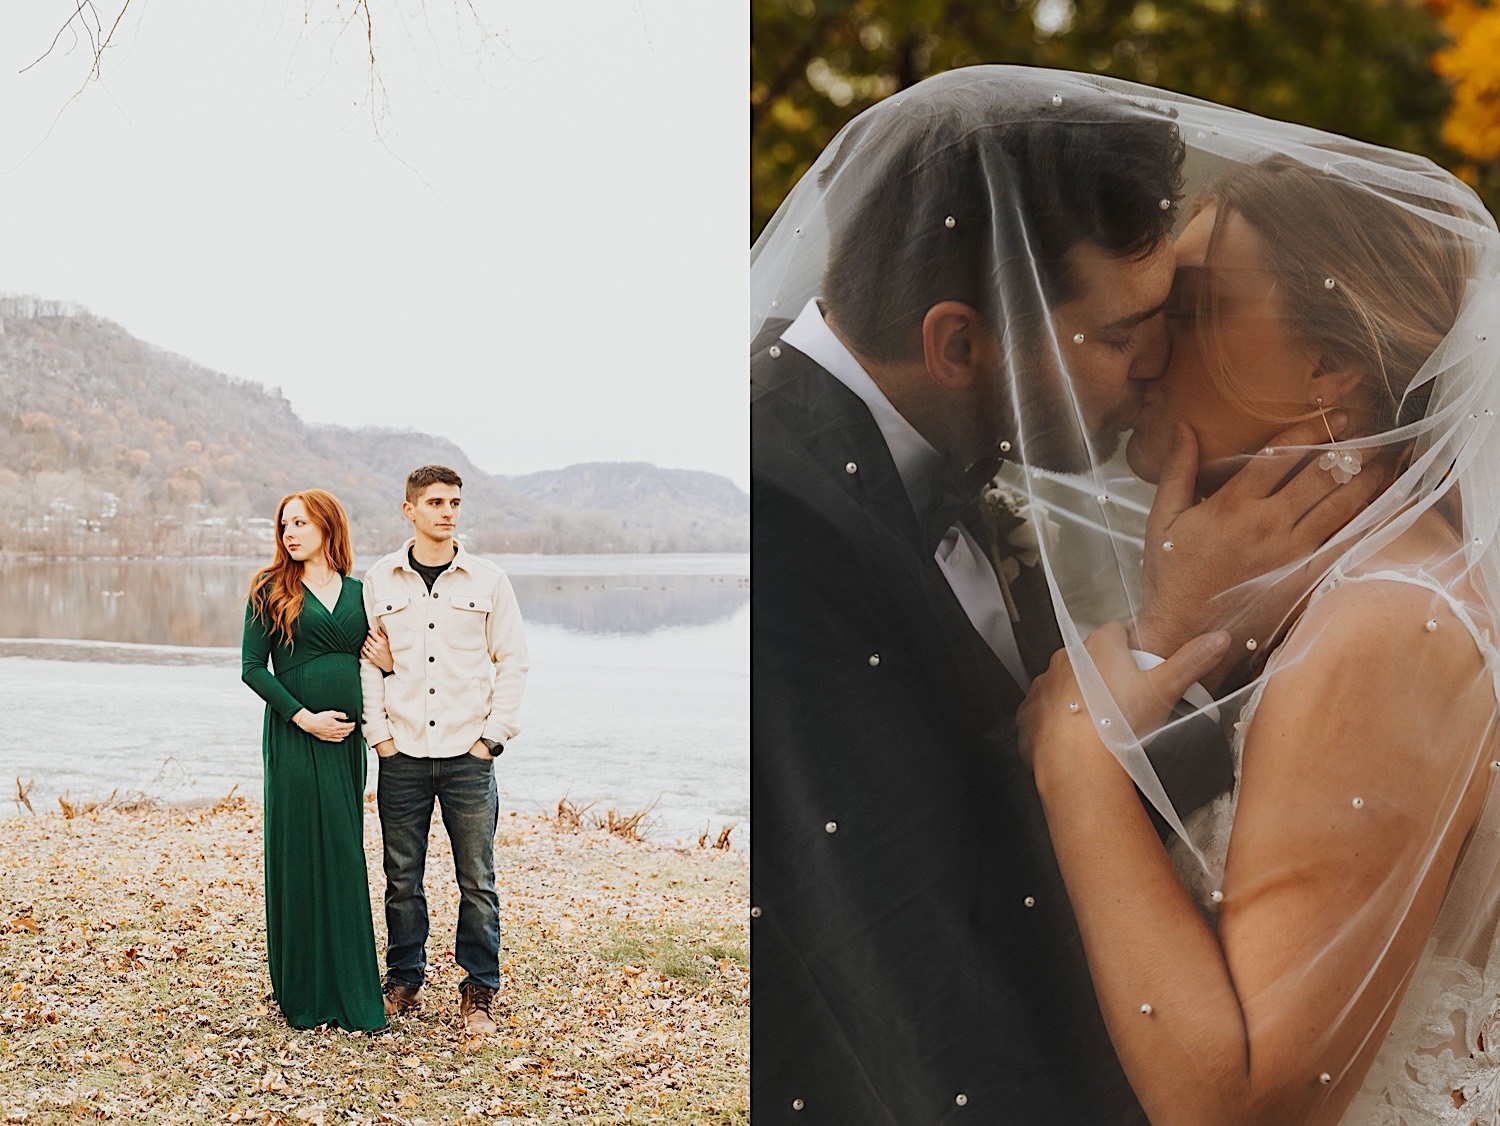 2 photos side by side, the left is of a couple standing in front of a lake together, the right is of a bride and groom kissing while under the bride's veil